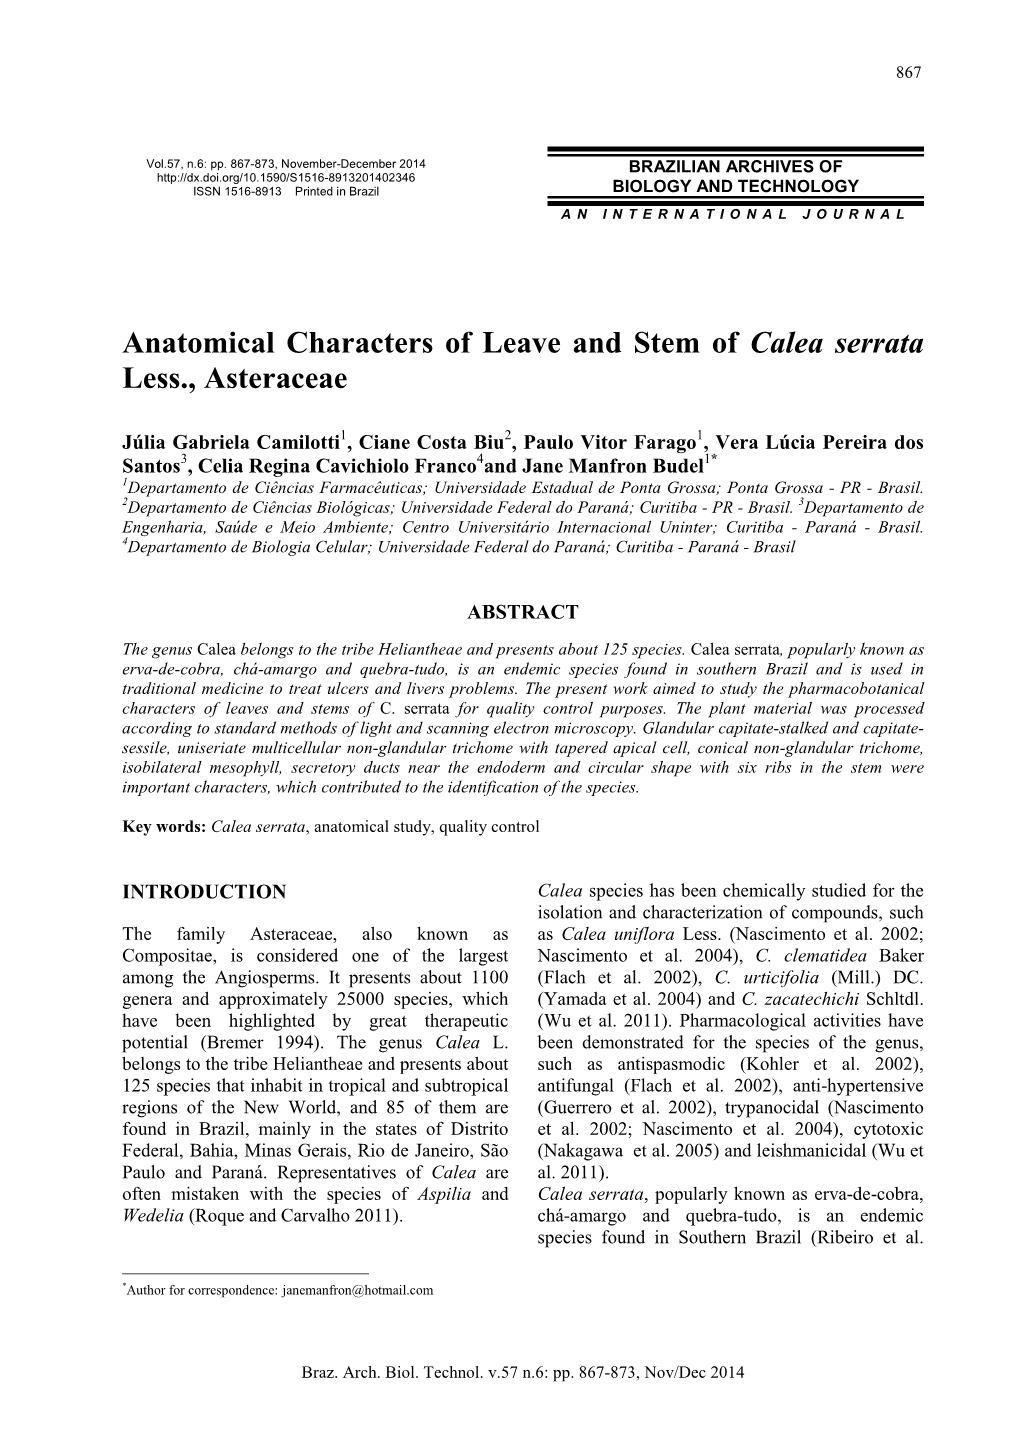 Anatomical Characters of Leave and Stem of Calea Serrata Less., Asteraceae